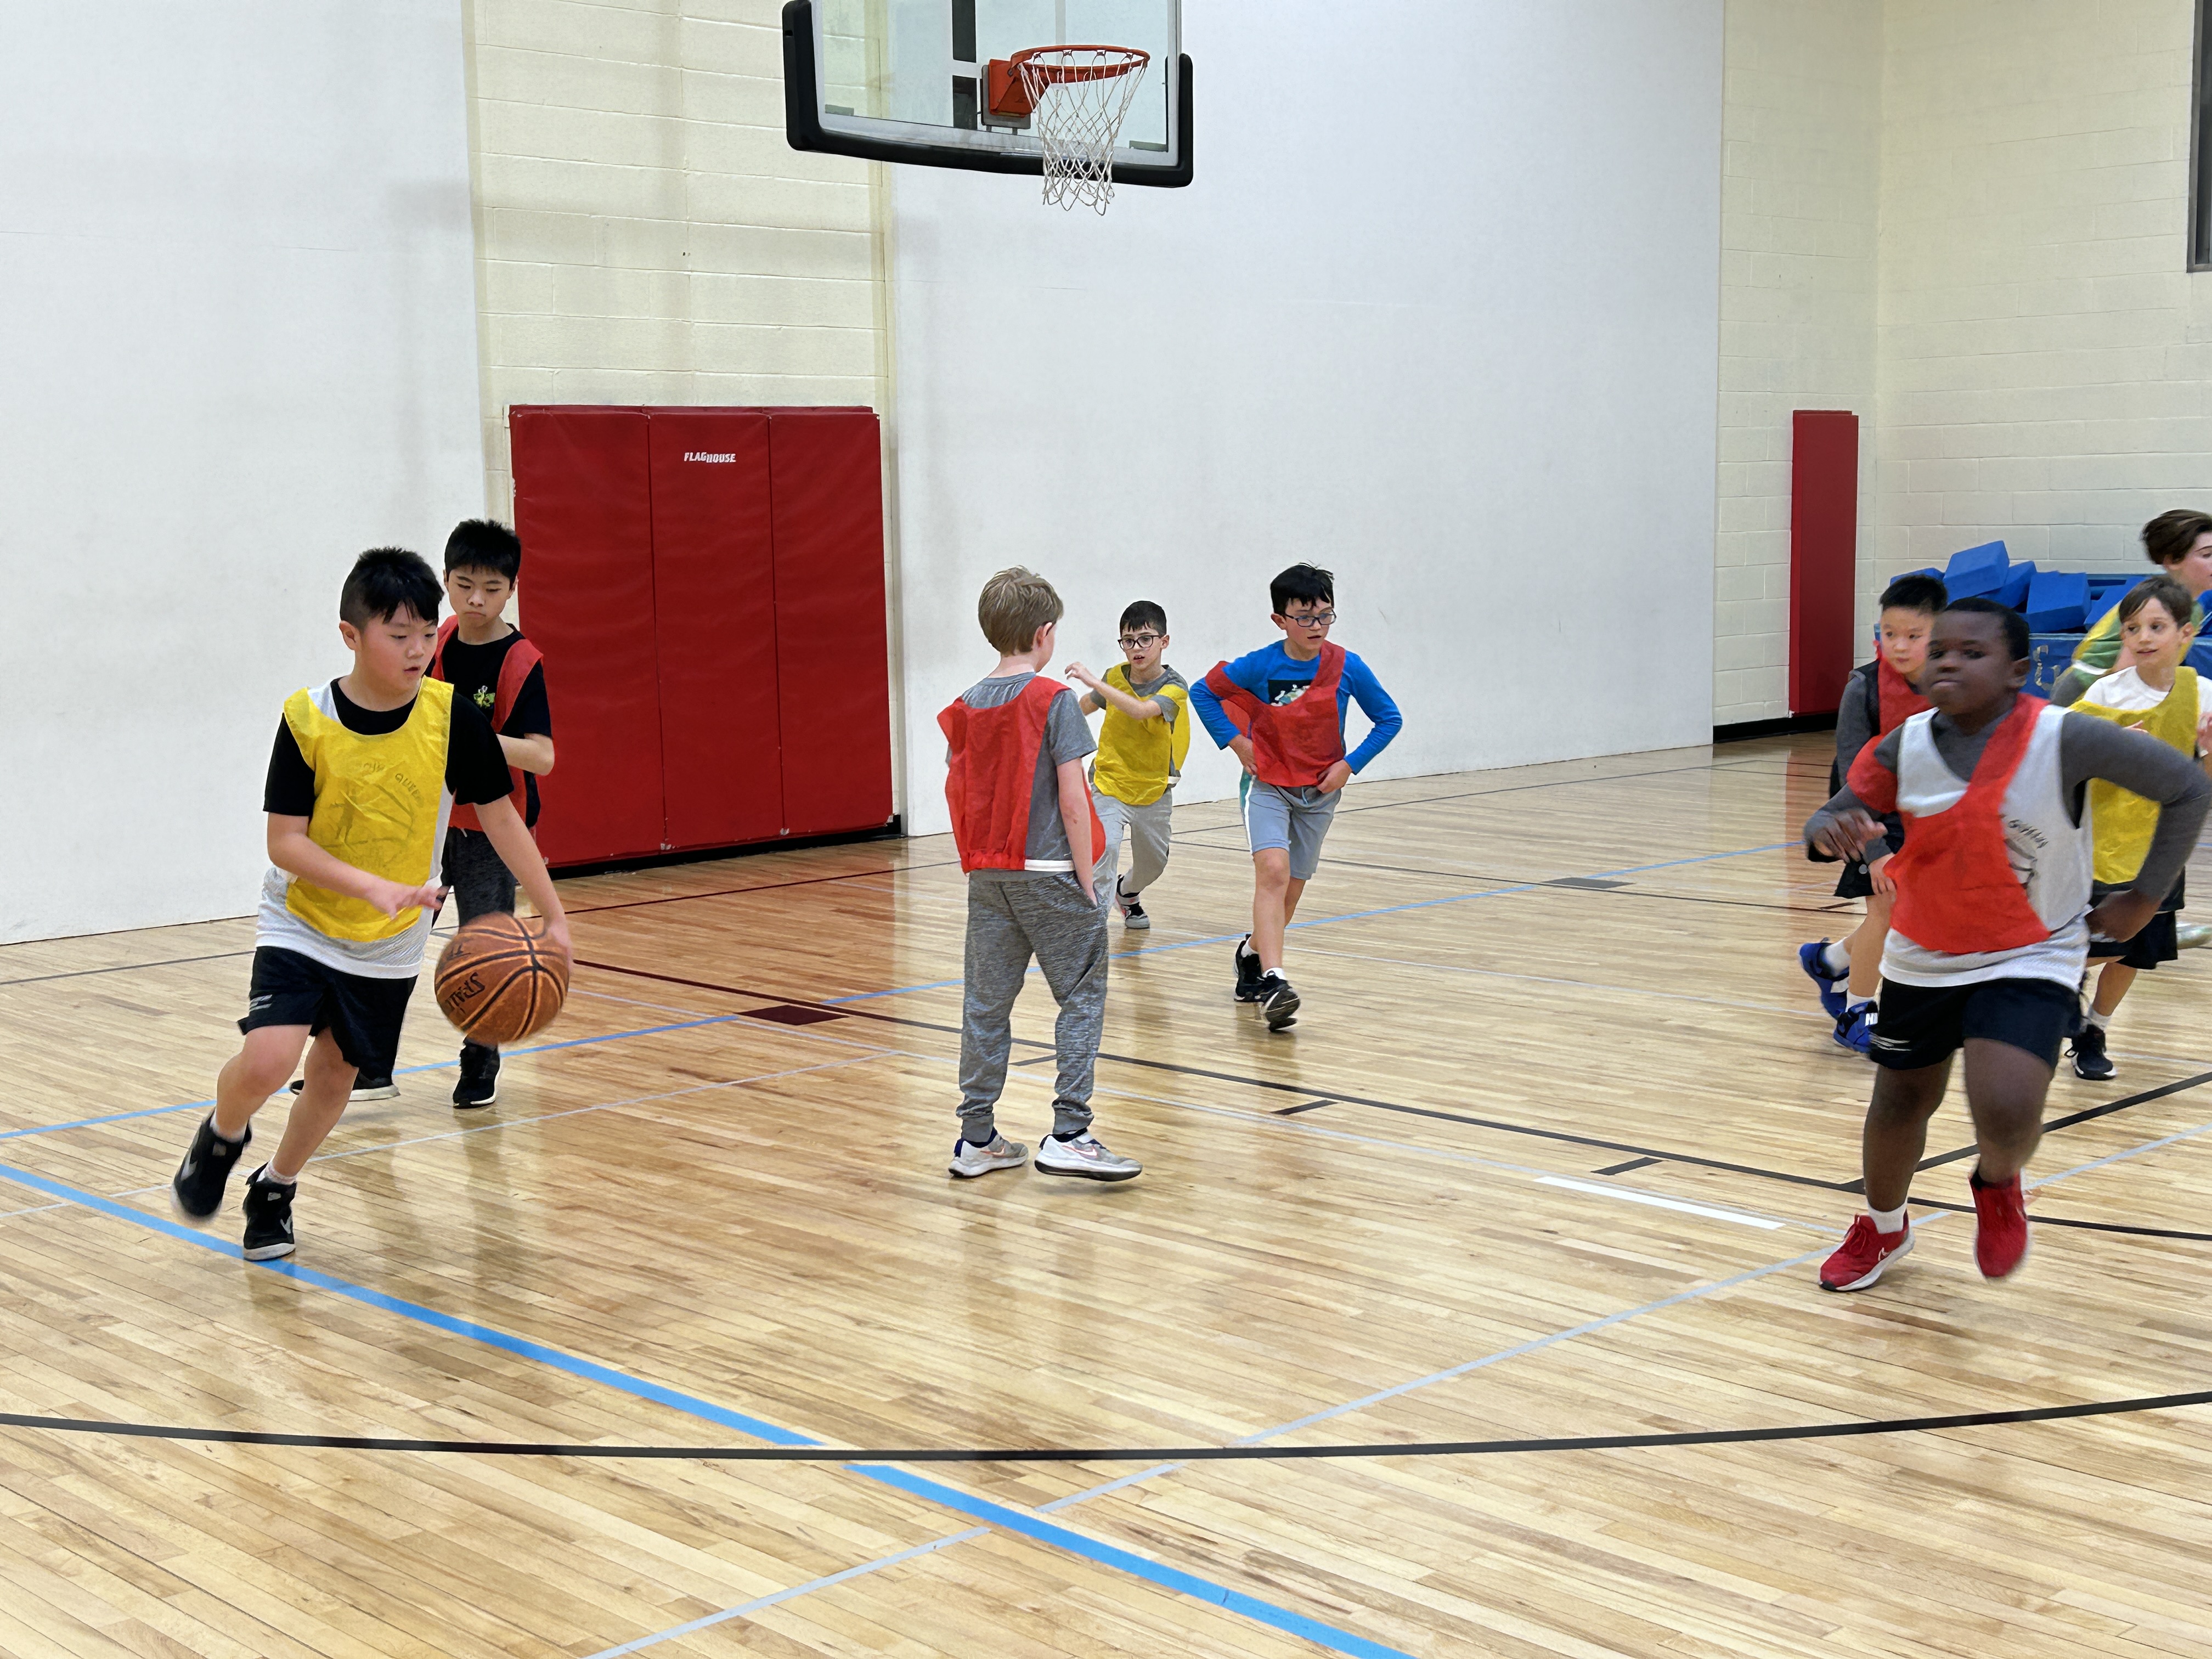 A group of kids playing basketball in a gym located in Little Neck.